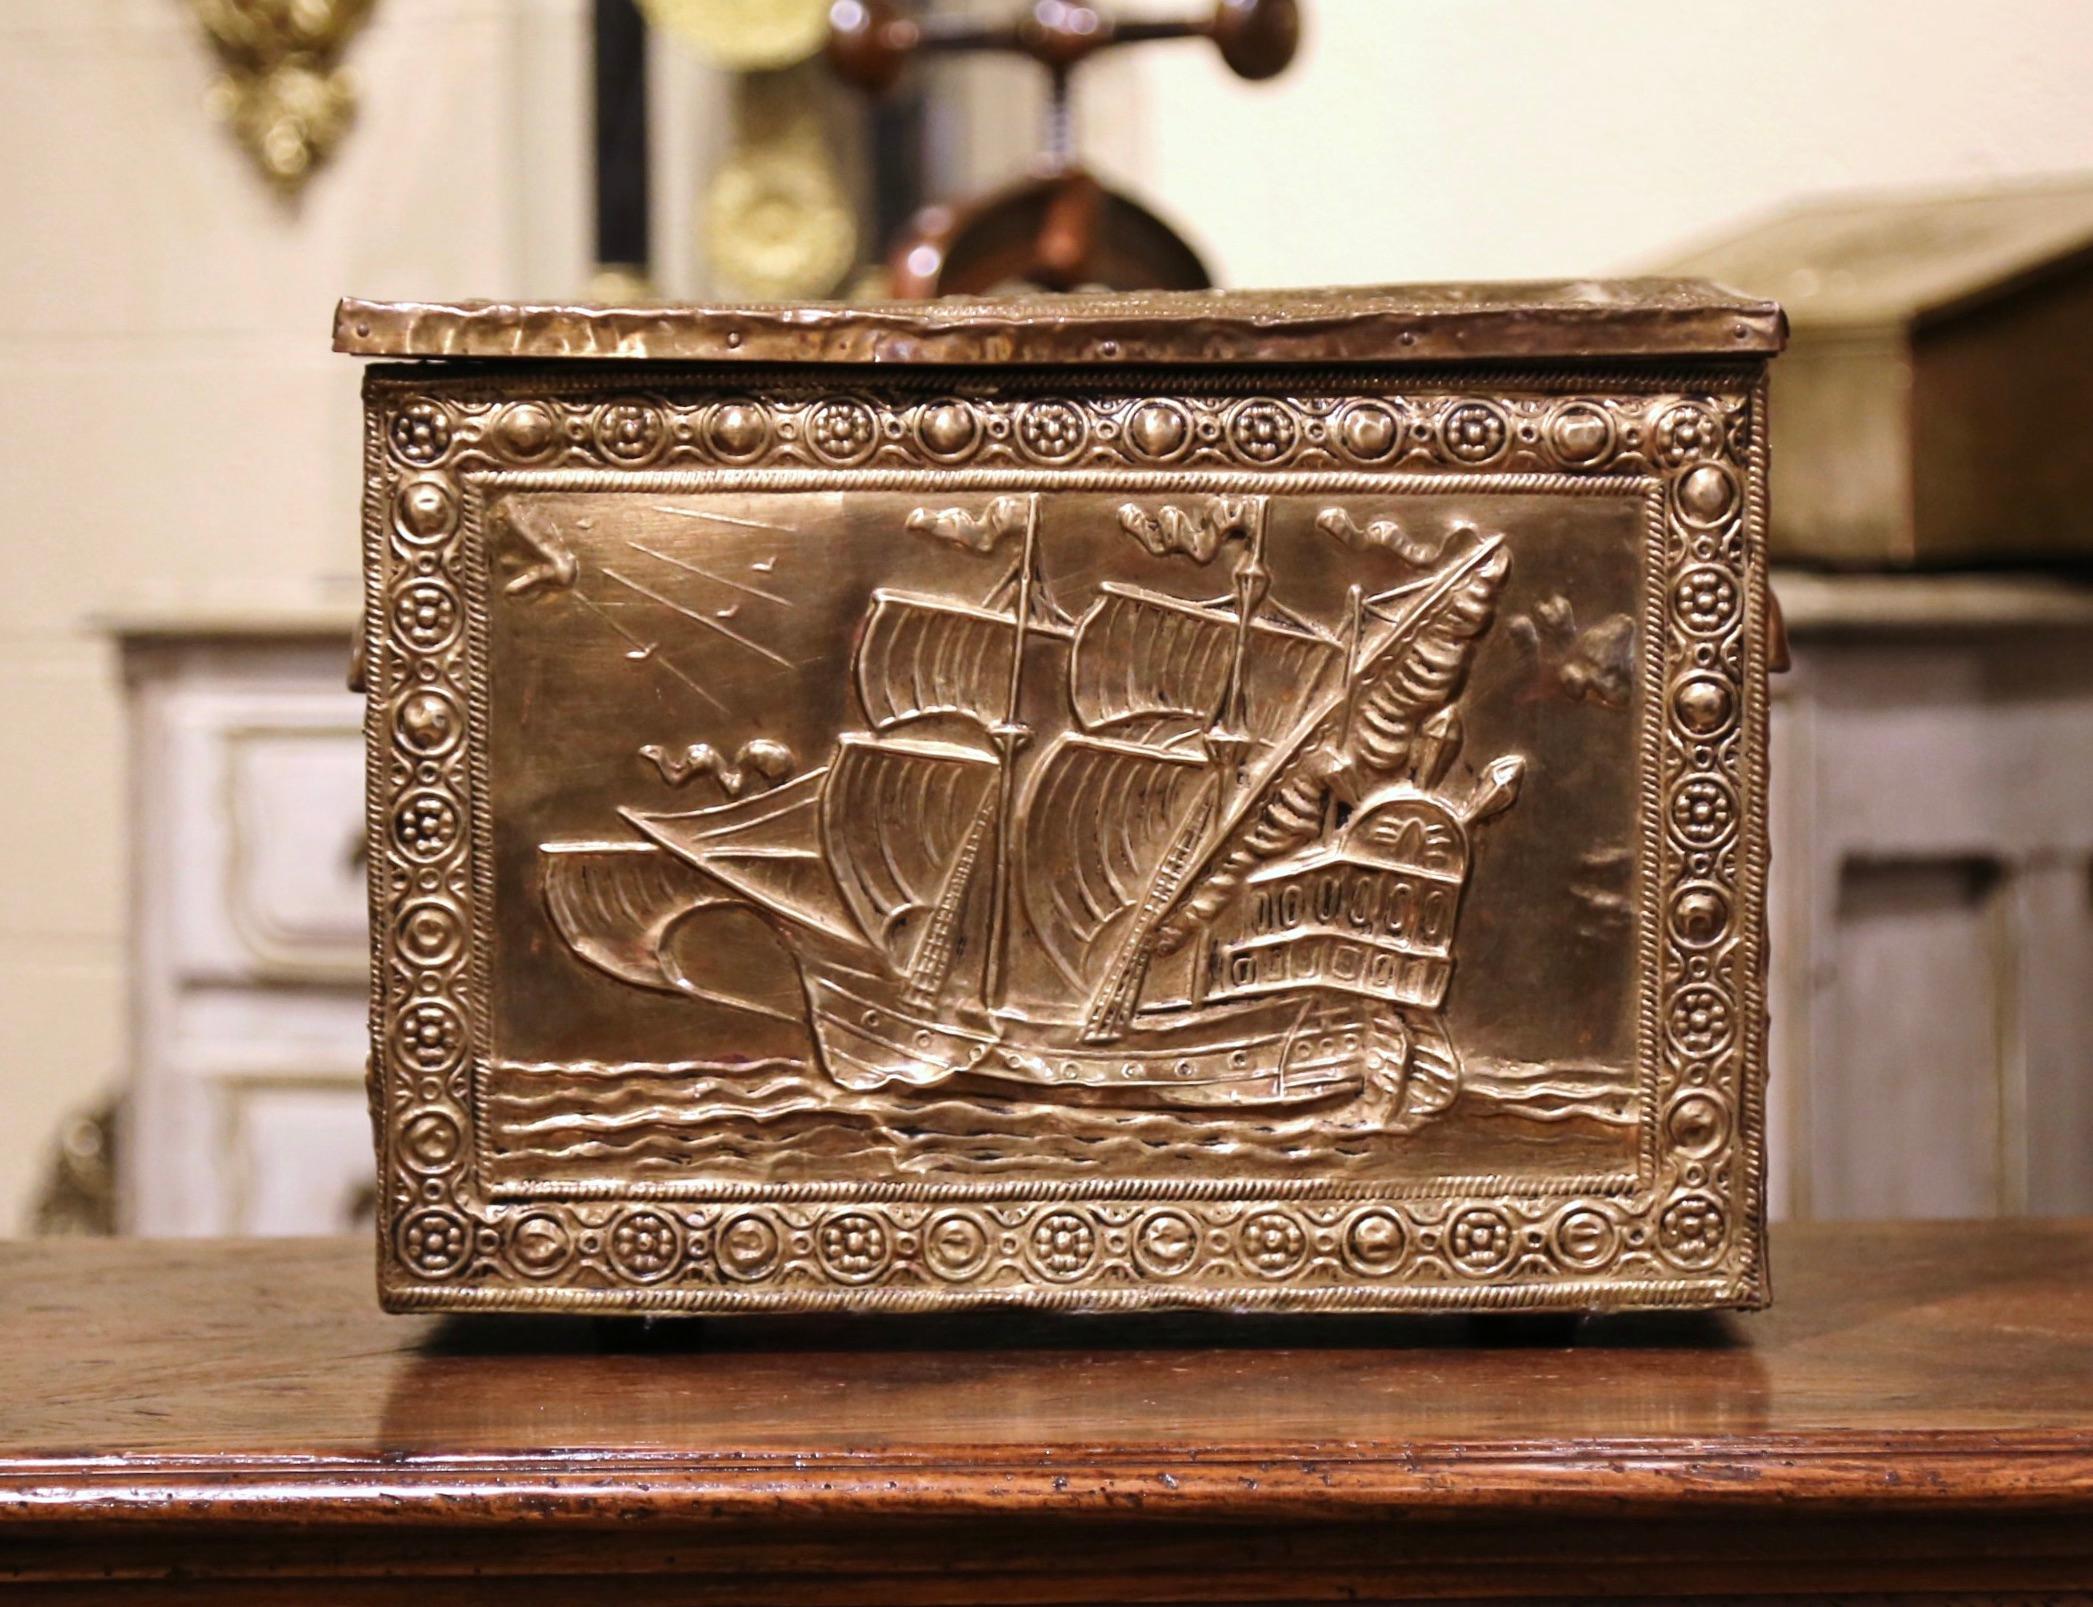 Crafted in France circa 1870 and rectangular in shape, the antique wooden and brass coffer is decorated with repousse sailboat scenes on the top and front while both sides are dressed with handles. The top opens to inside storage. The decorative